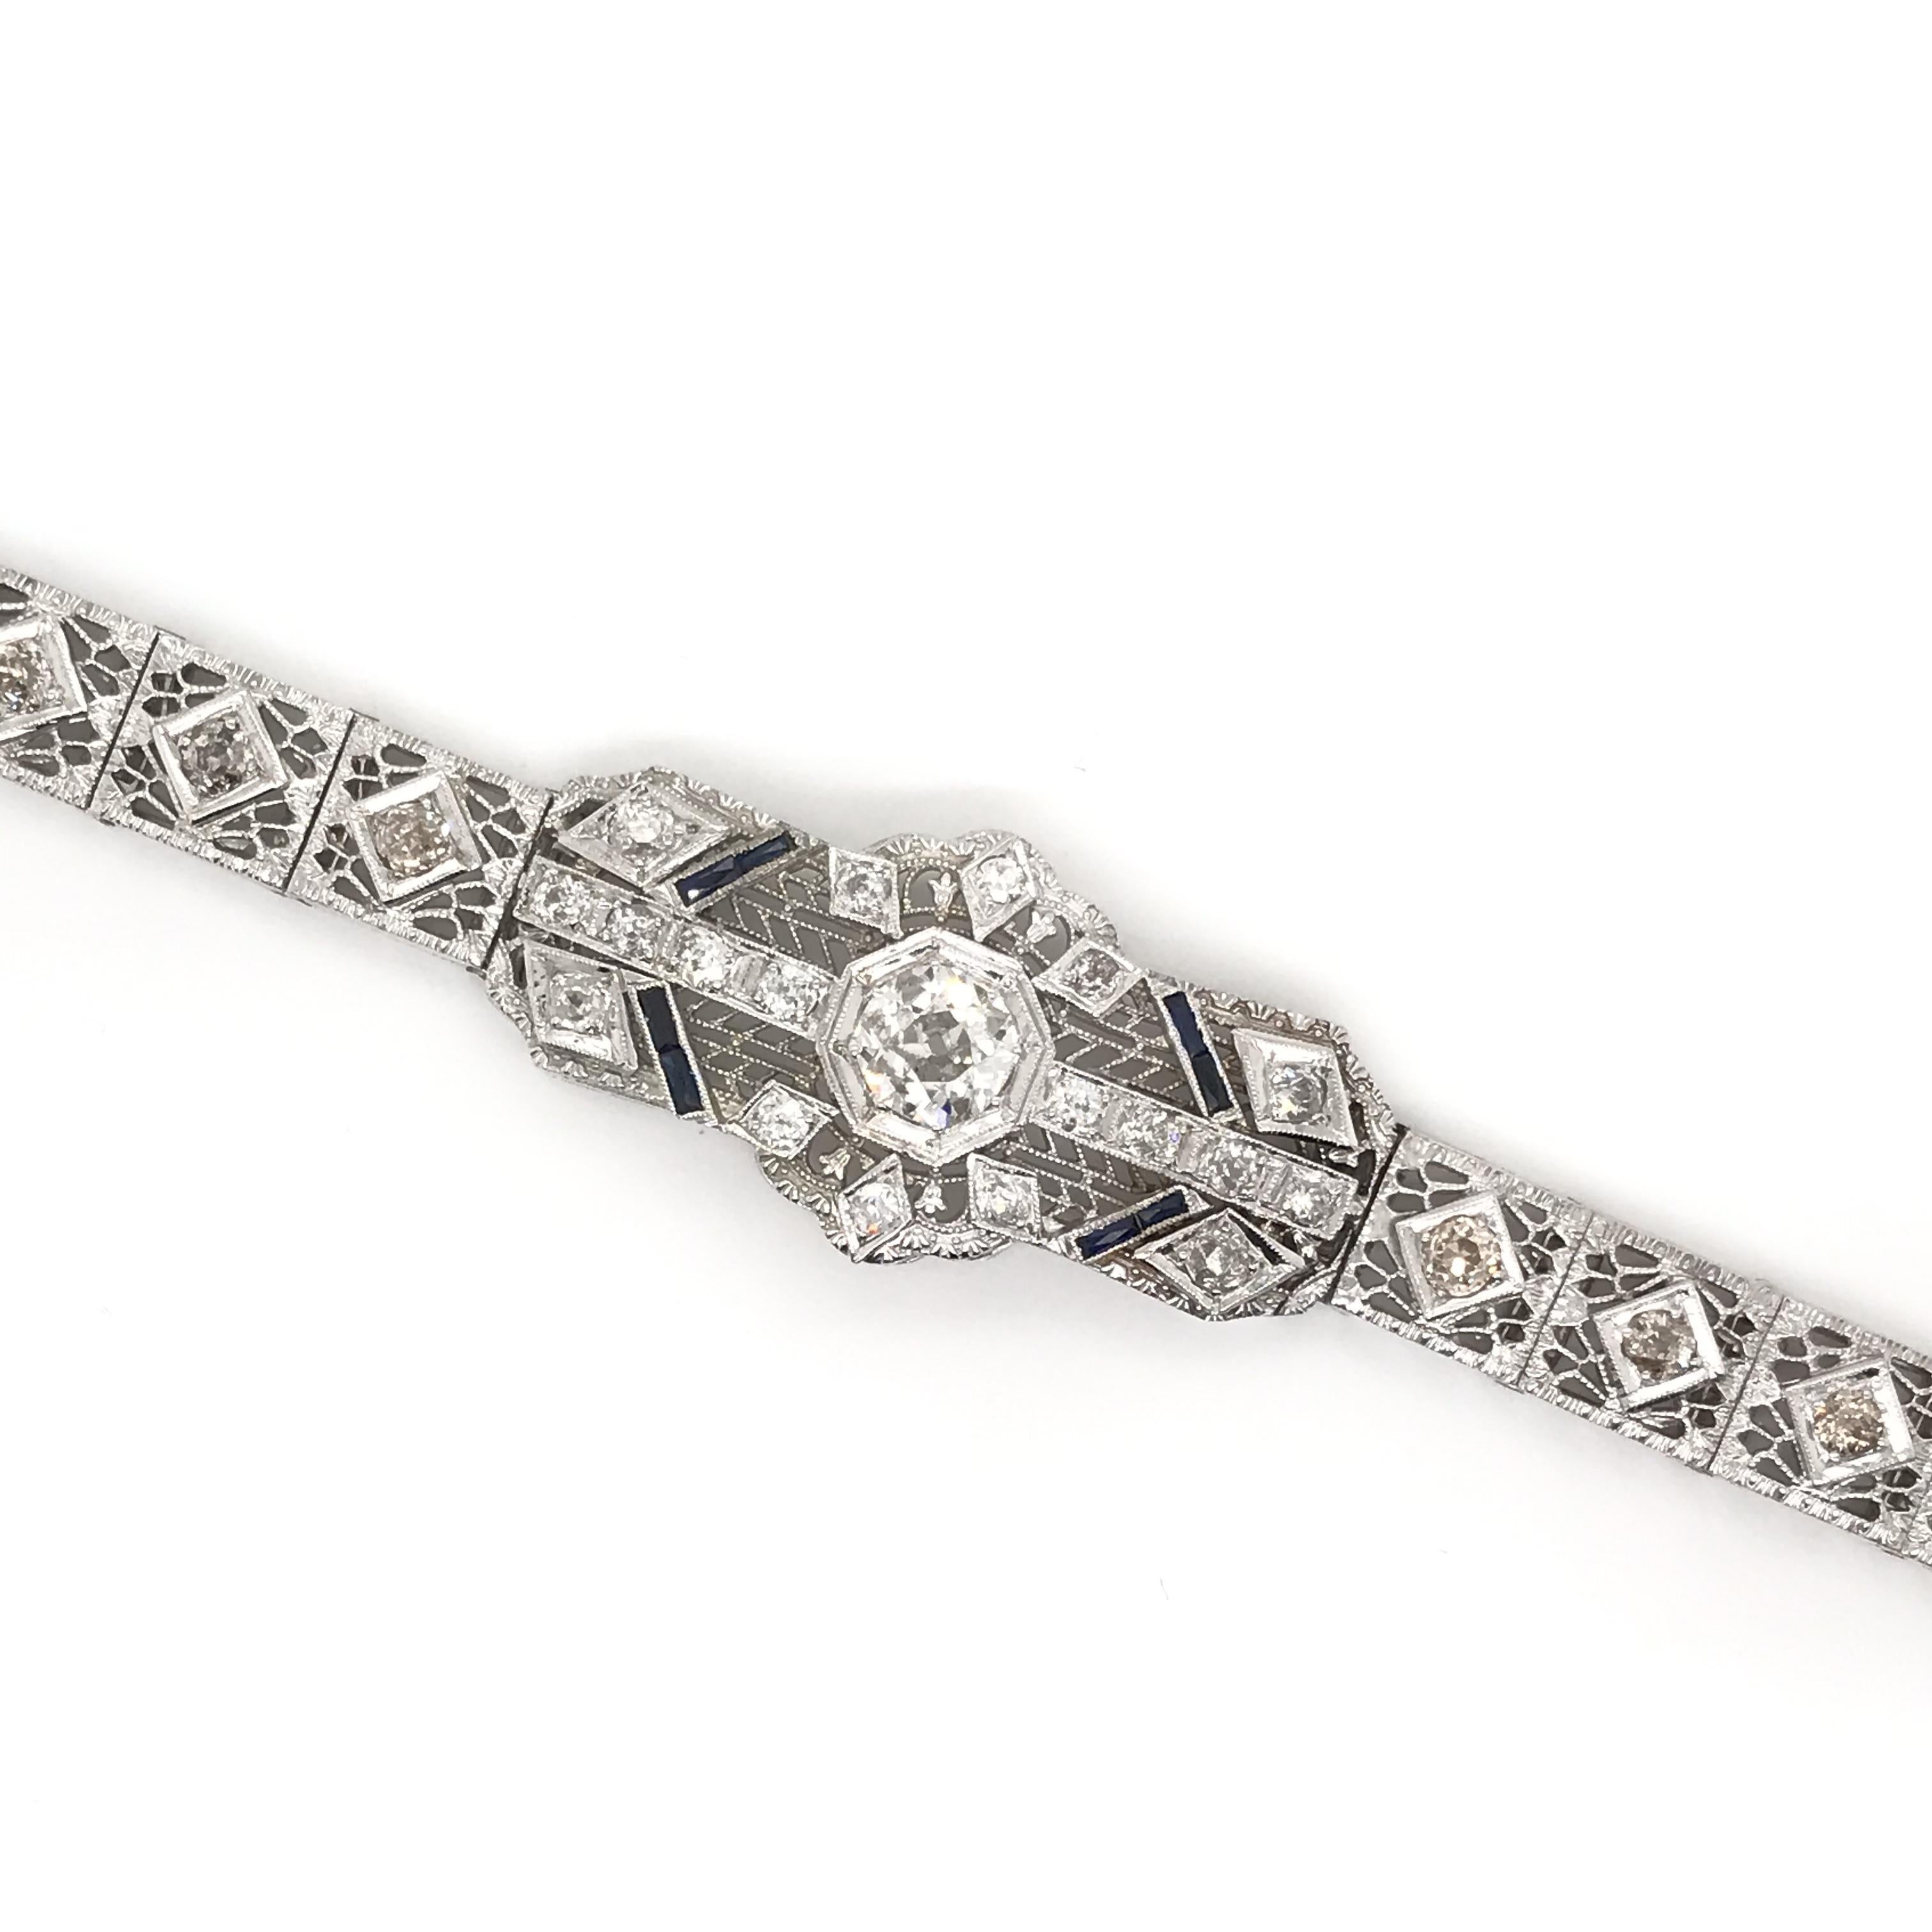 This exquisite antique piece was crafted sometime during the Art Deco design period (1920-1940). This phenomenal antique filigree bracelet features 27 diamonds including a center diamond measuring approximately 1 carat. The diamonds are antique Old